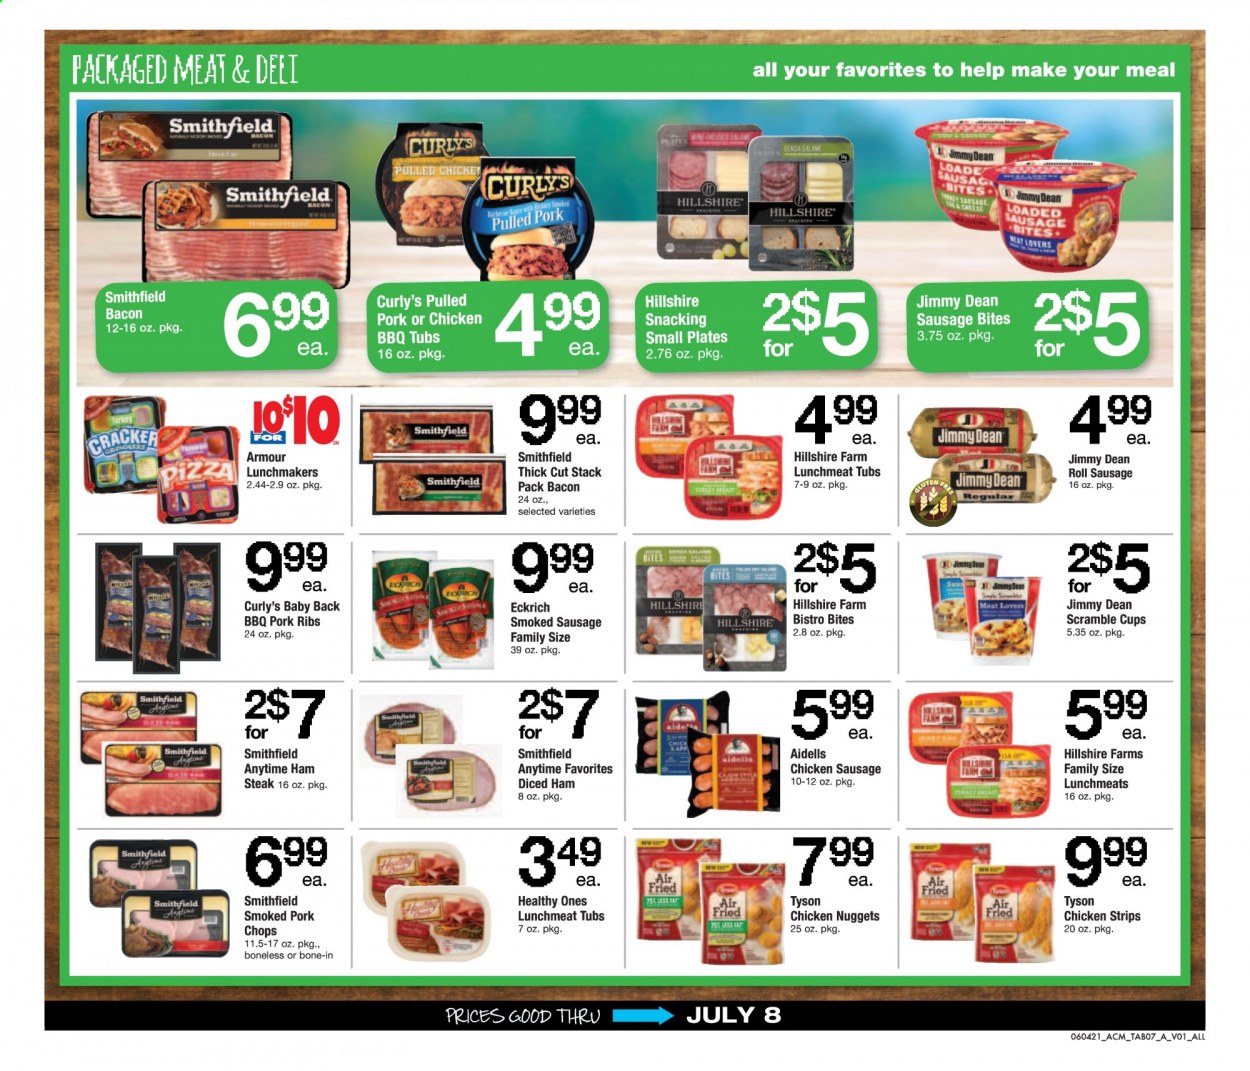 thumbnail - ACME Flyer - 06/04/2021 - 07/08/2021 - Sales products - nuggets, chicken nuggets, pulled pork, Jimmy Dean, bacon, ham, Hillshire Farm, sausage, smoked sausage, chicken sausage, lunch meat, ham steaks, cheese, strips, chicken strips, crackers, steak, pork meat, pork ribs, pork back ribs, plate, cup. Page 7.